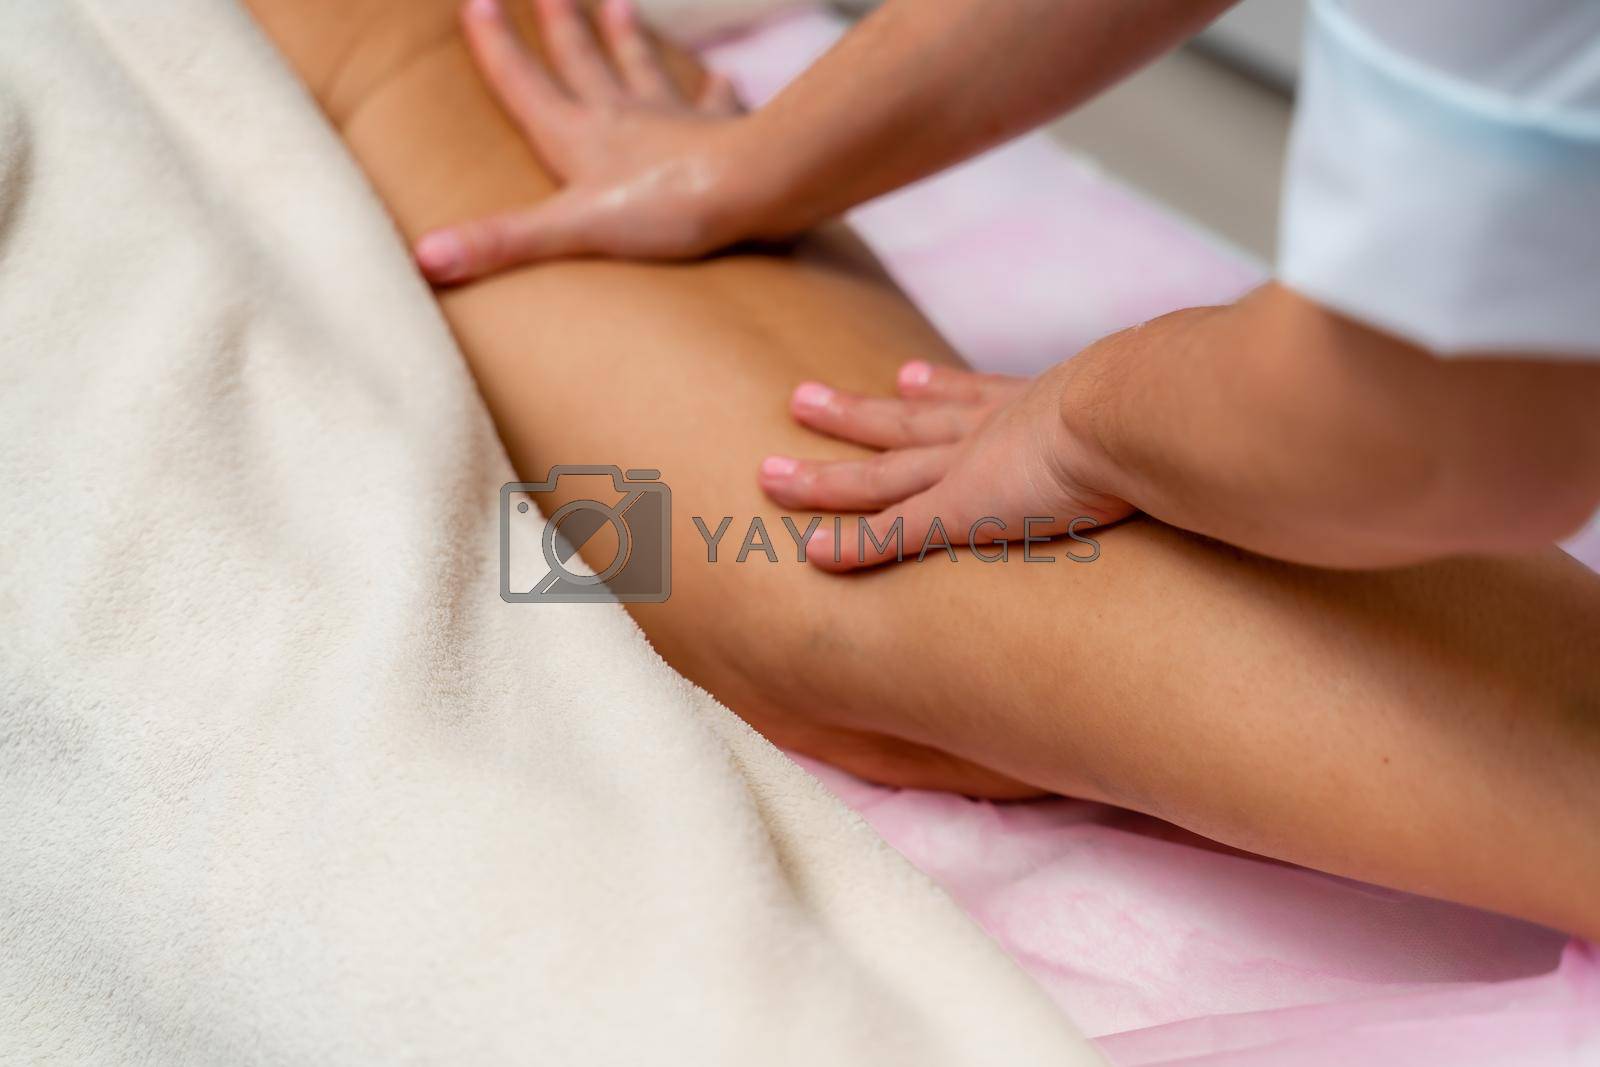 Facial massage. A woman is given a massage in a beauty salon. Close-up